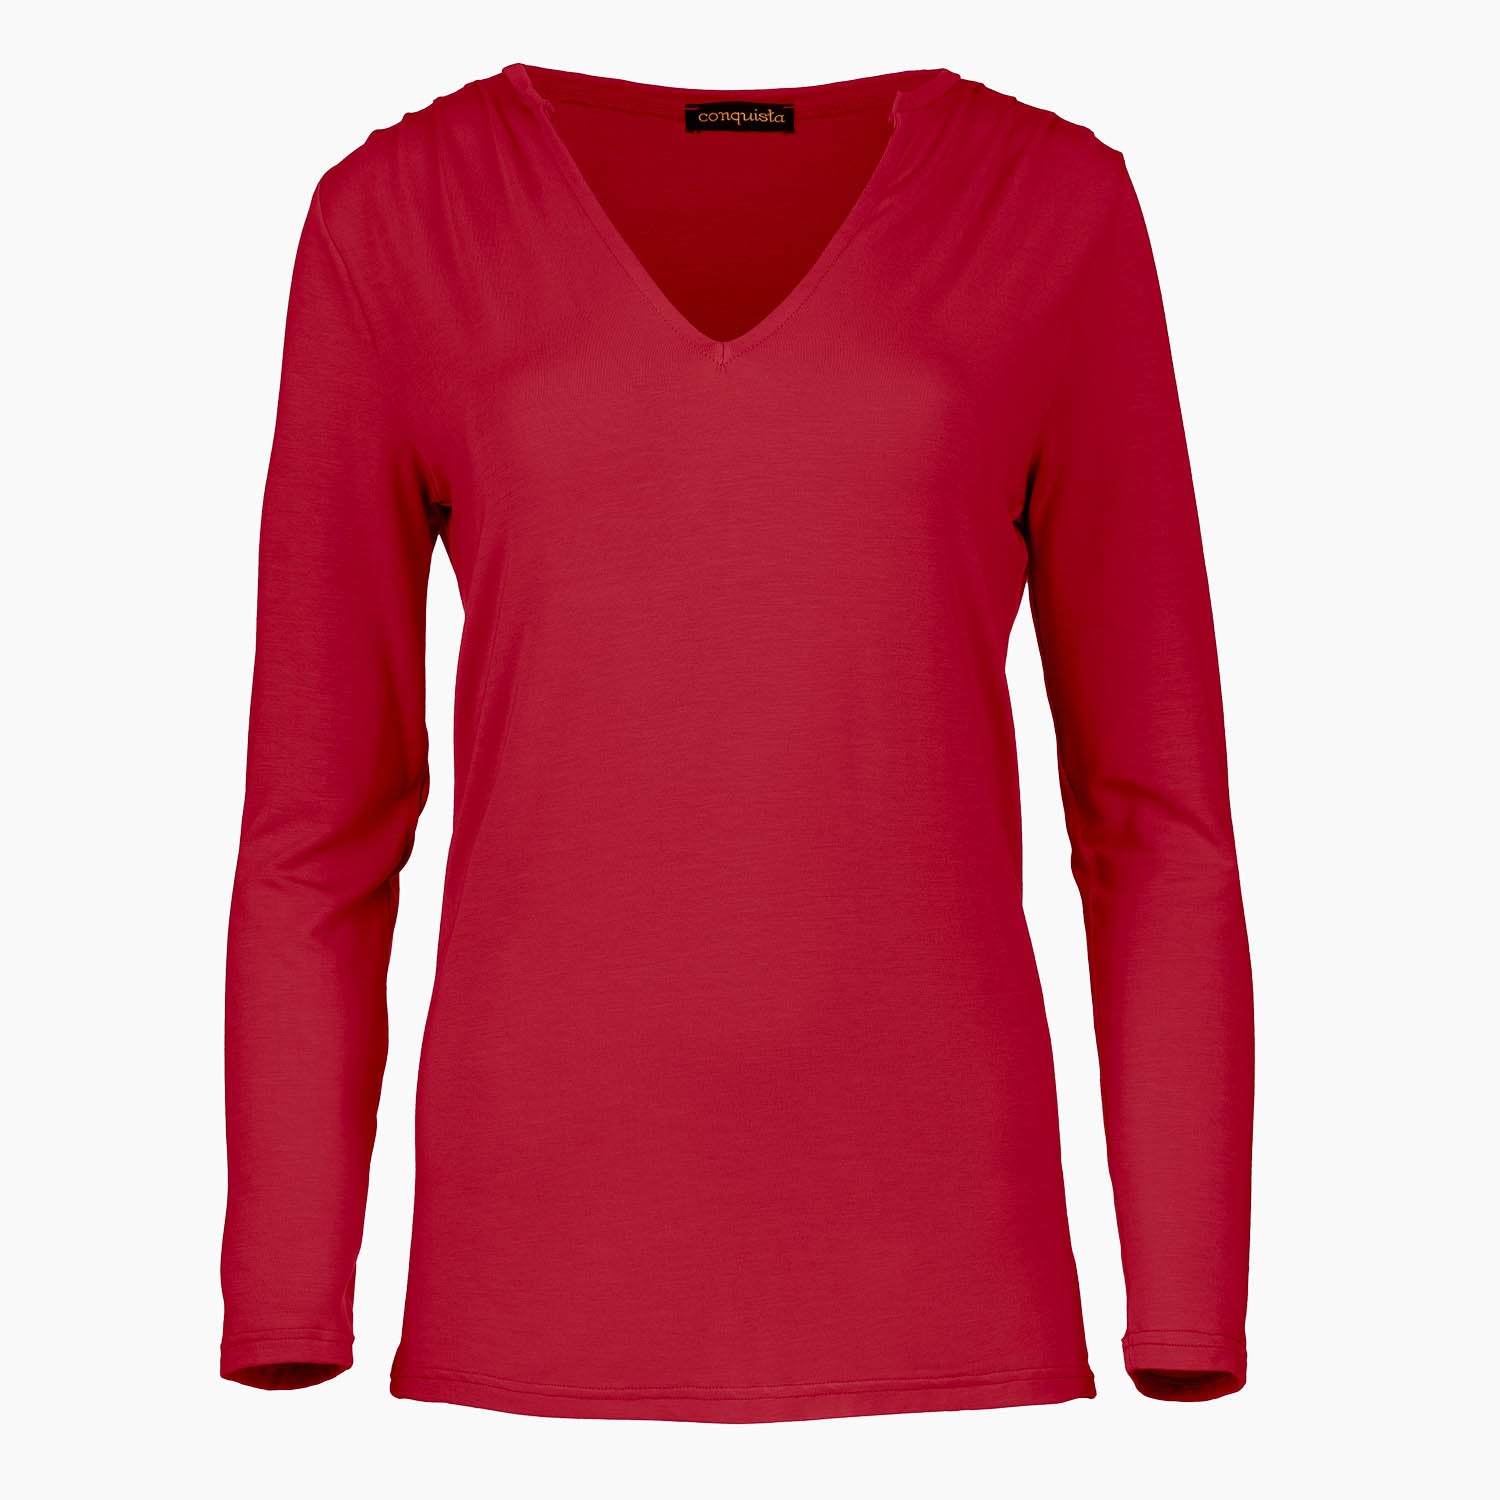 Women’s Red Jersey V Neck Top Large Conquista